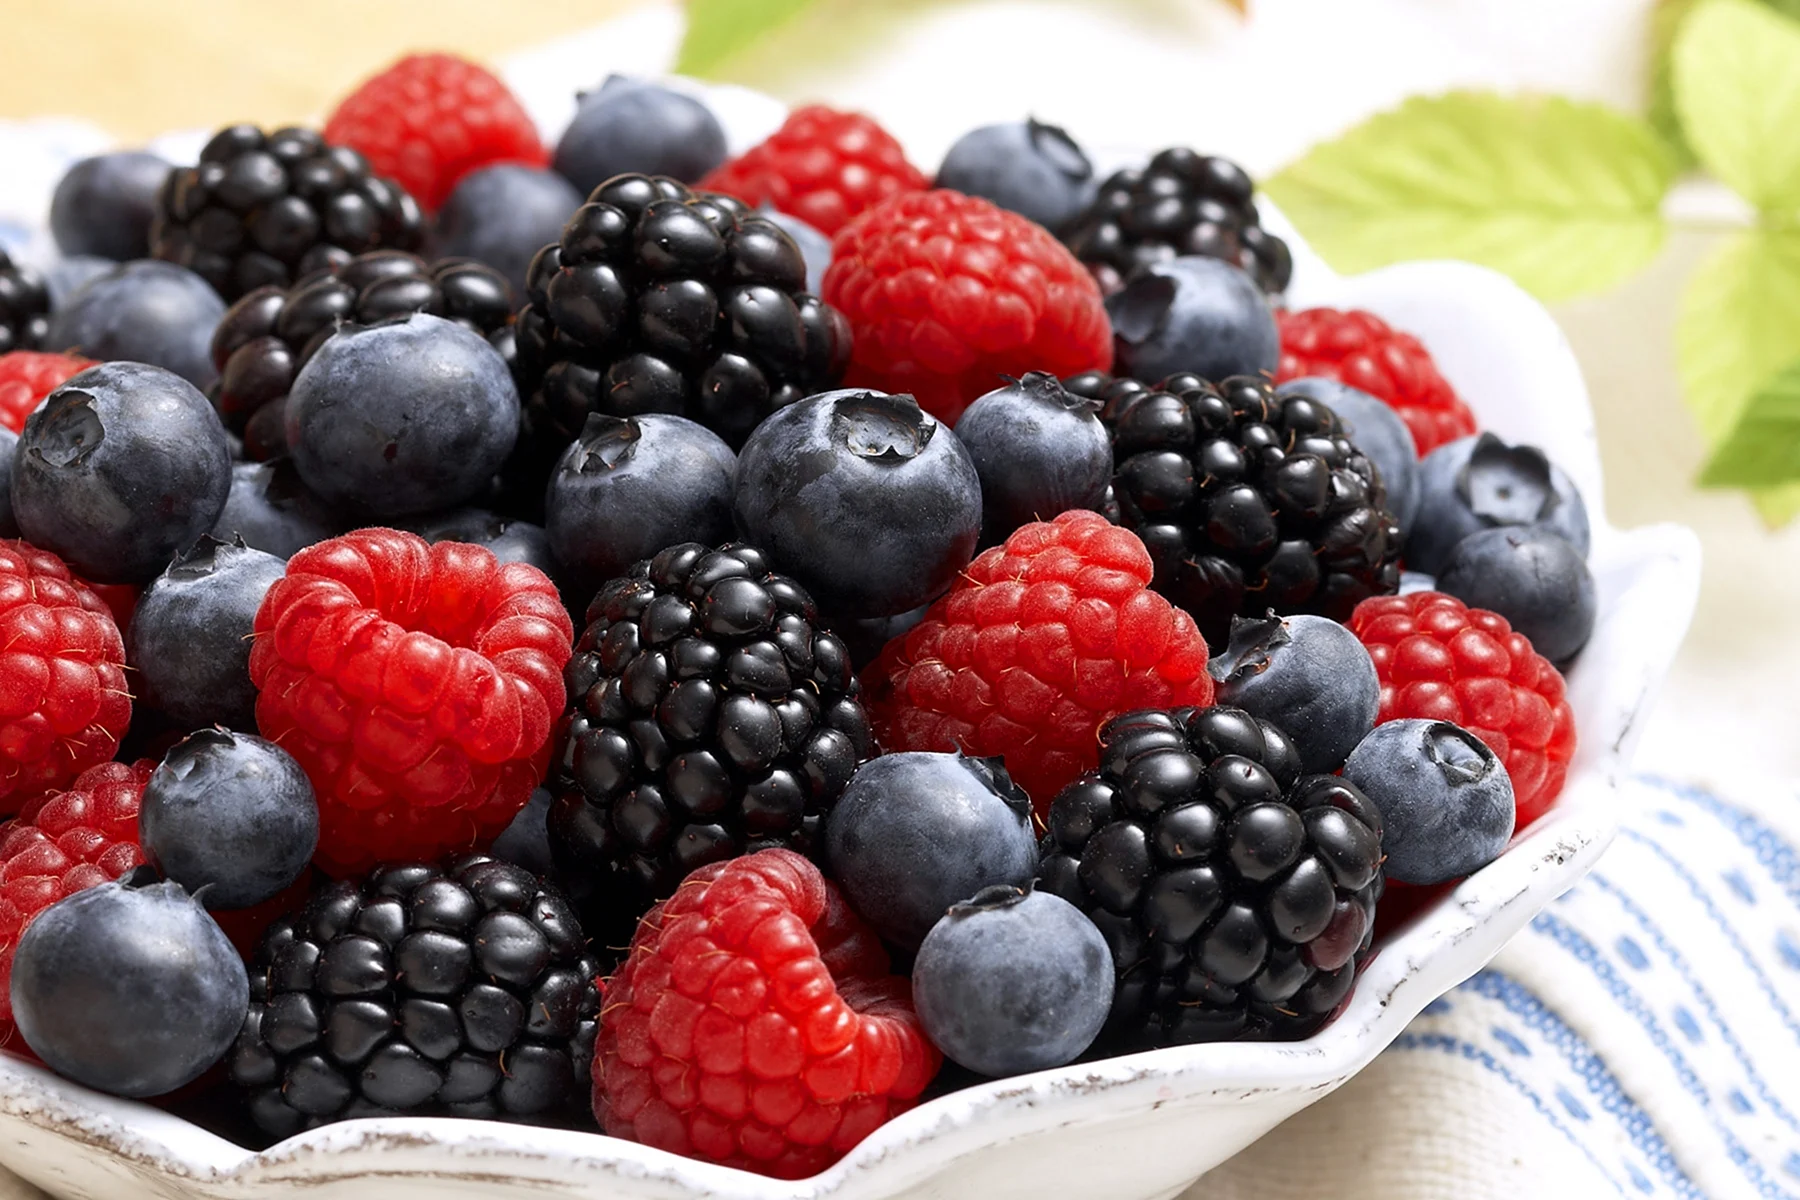 Kinds of Berries